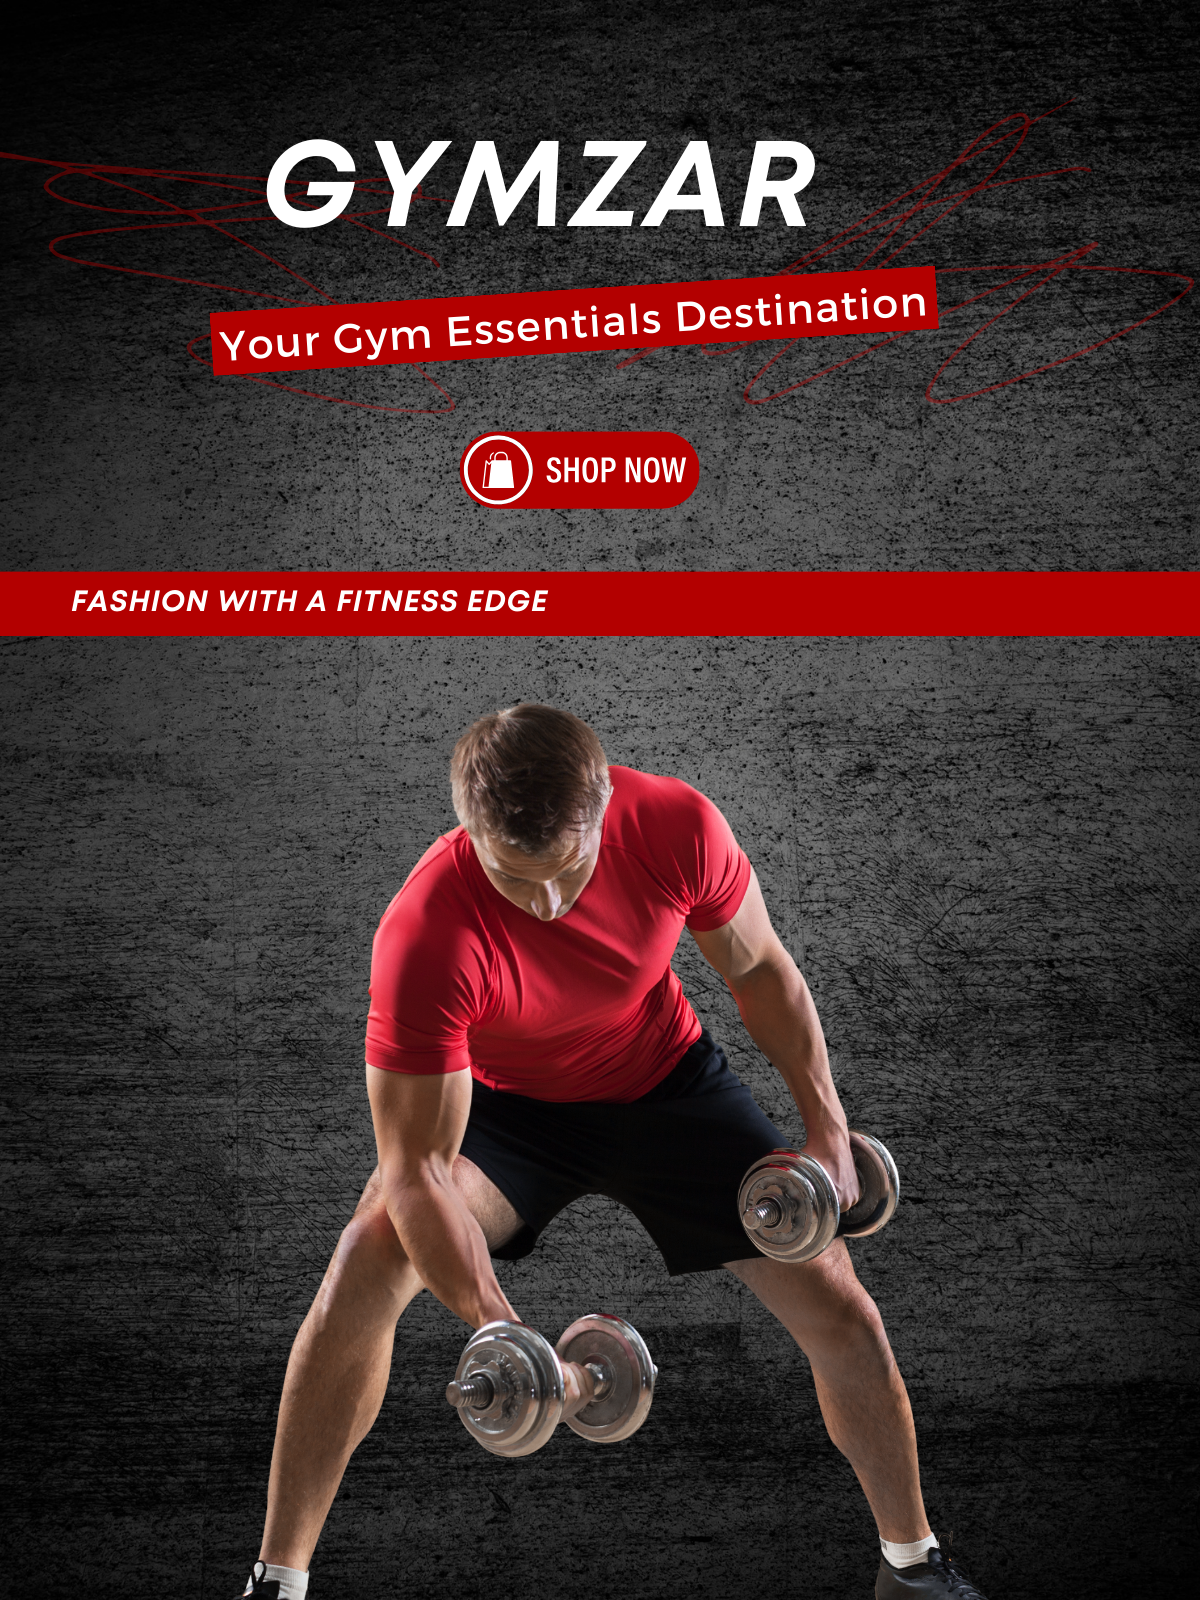 White_Modern_Fitness_Workout_Background_Banner_Landscape_1200_x_1600_px.png